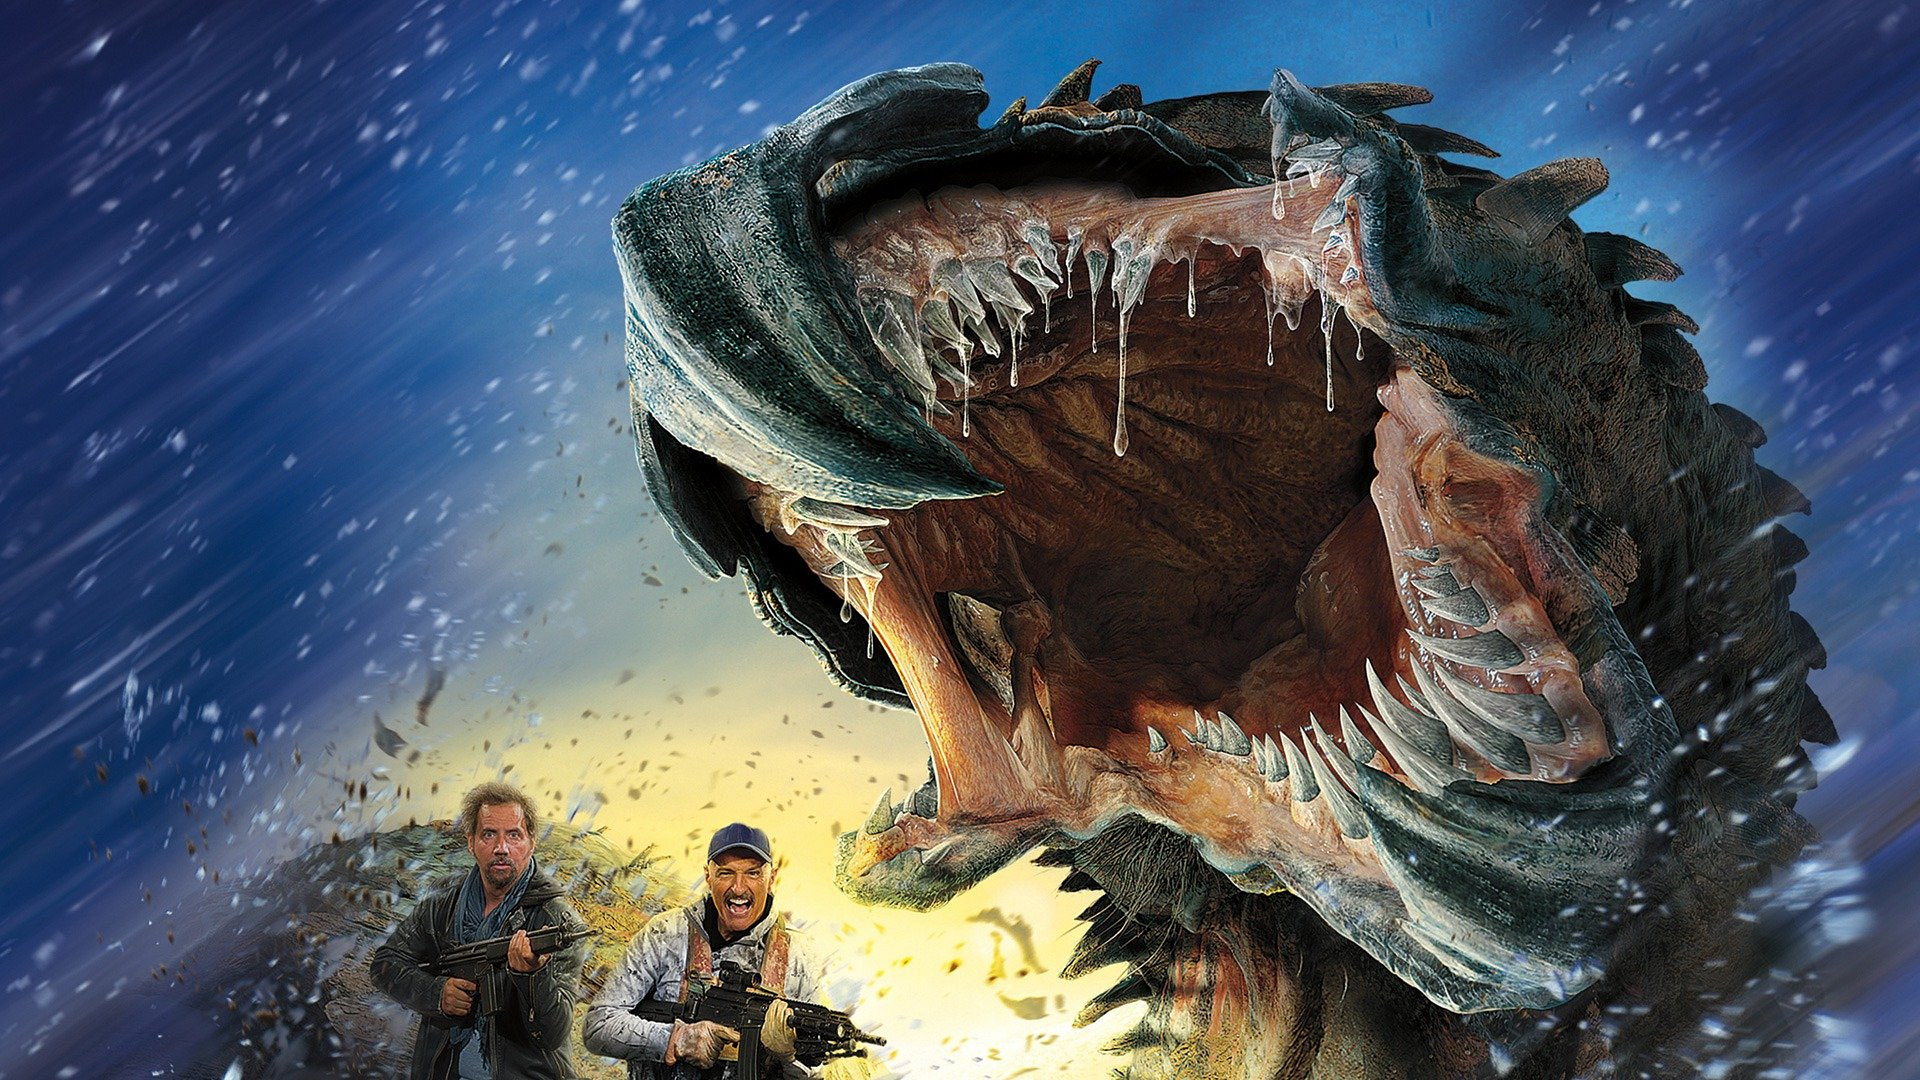 Tremors: A Cold day in Hell